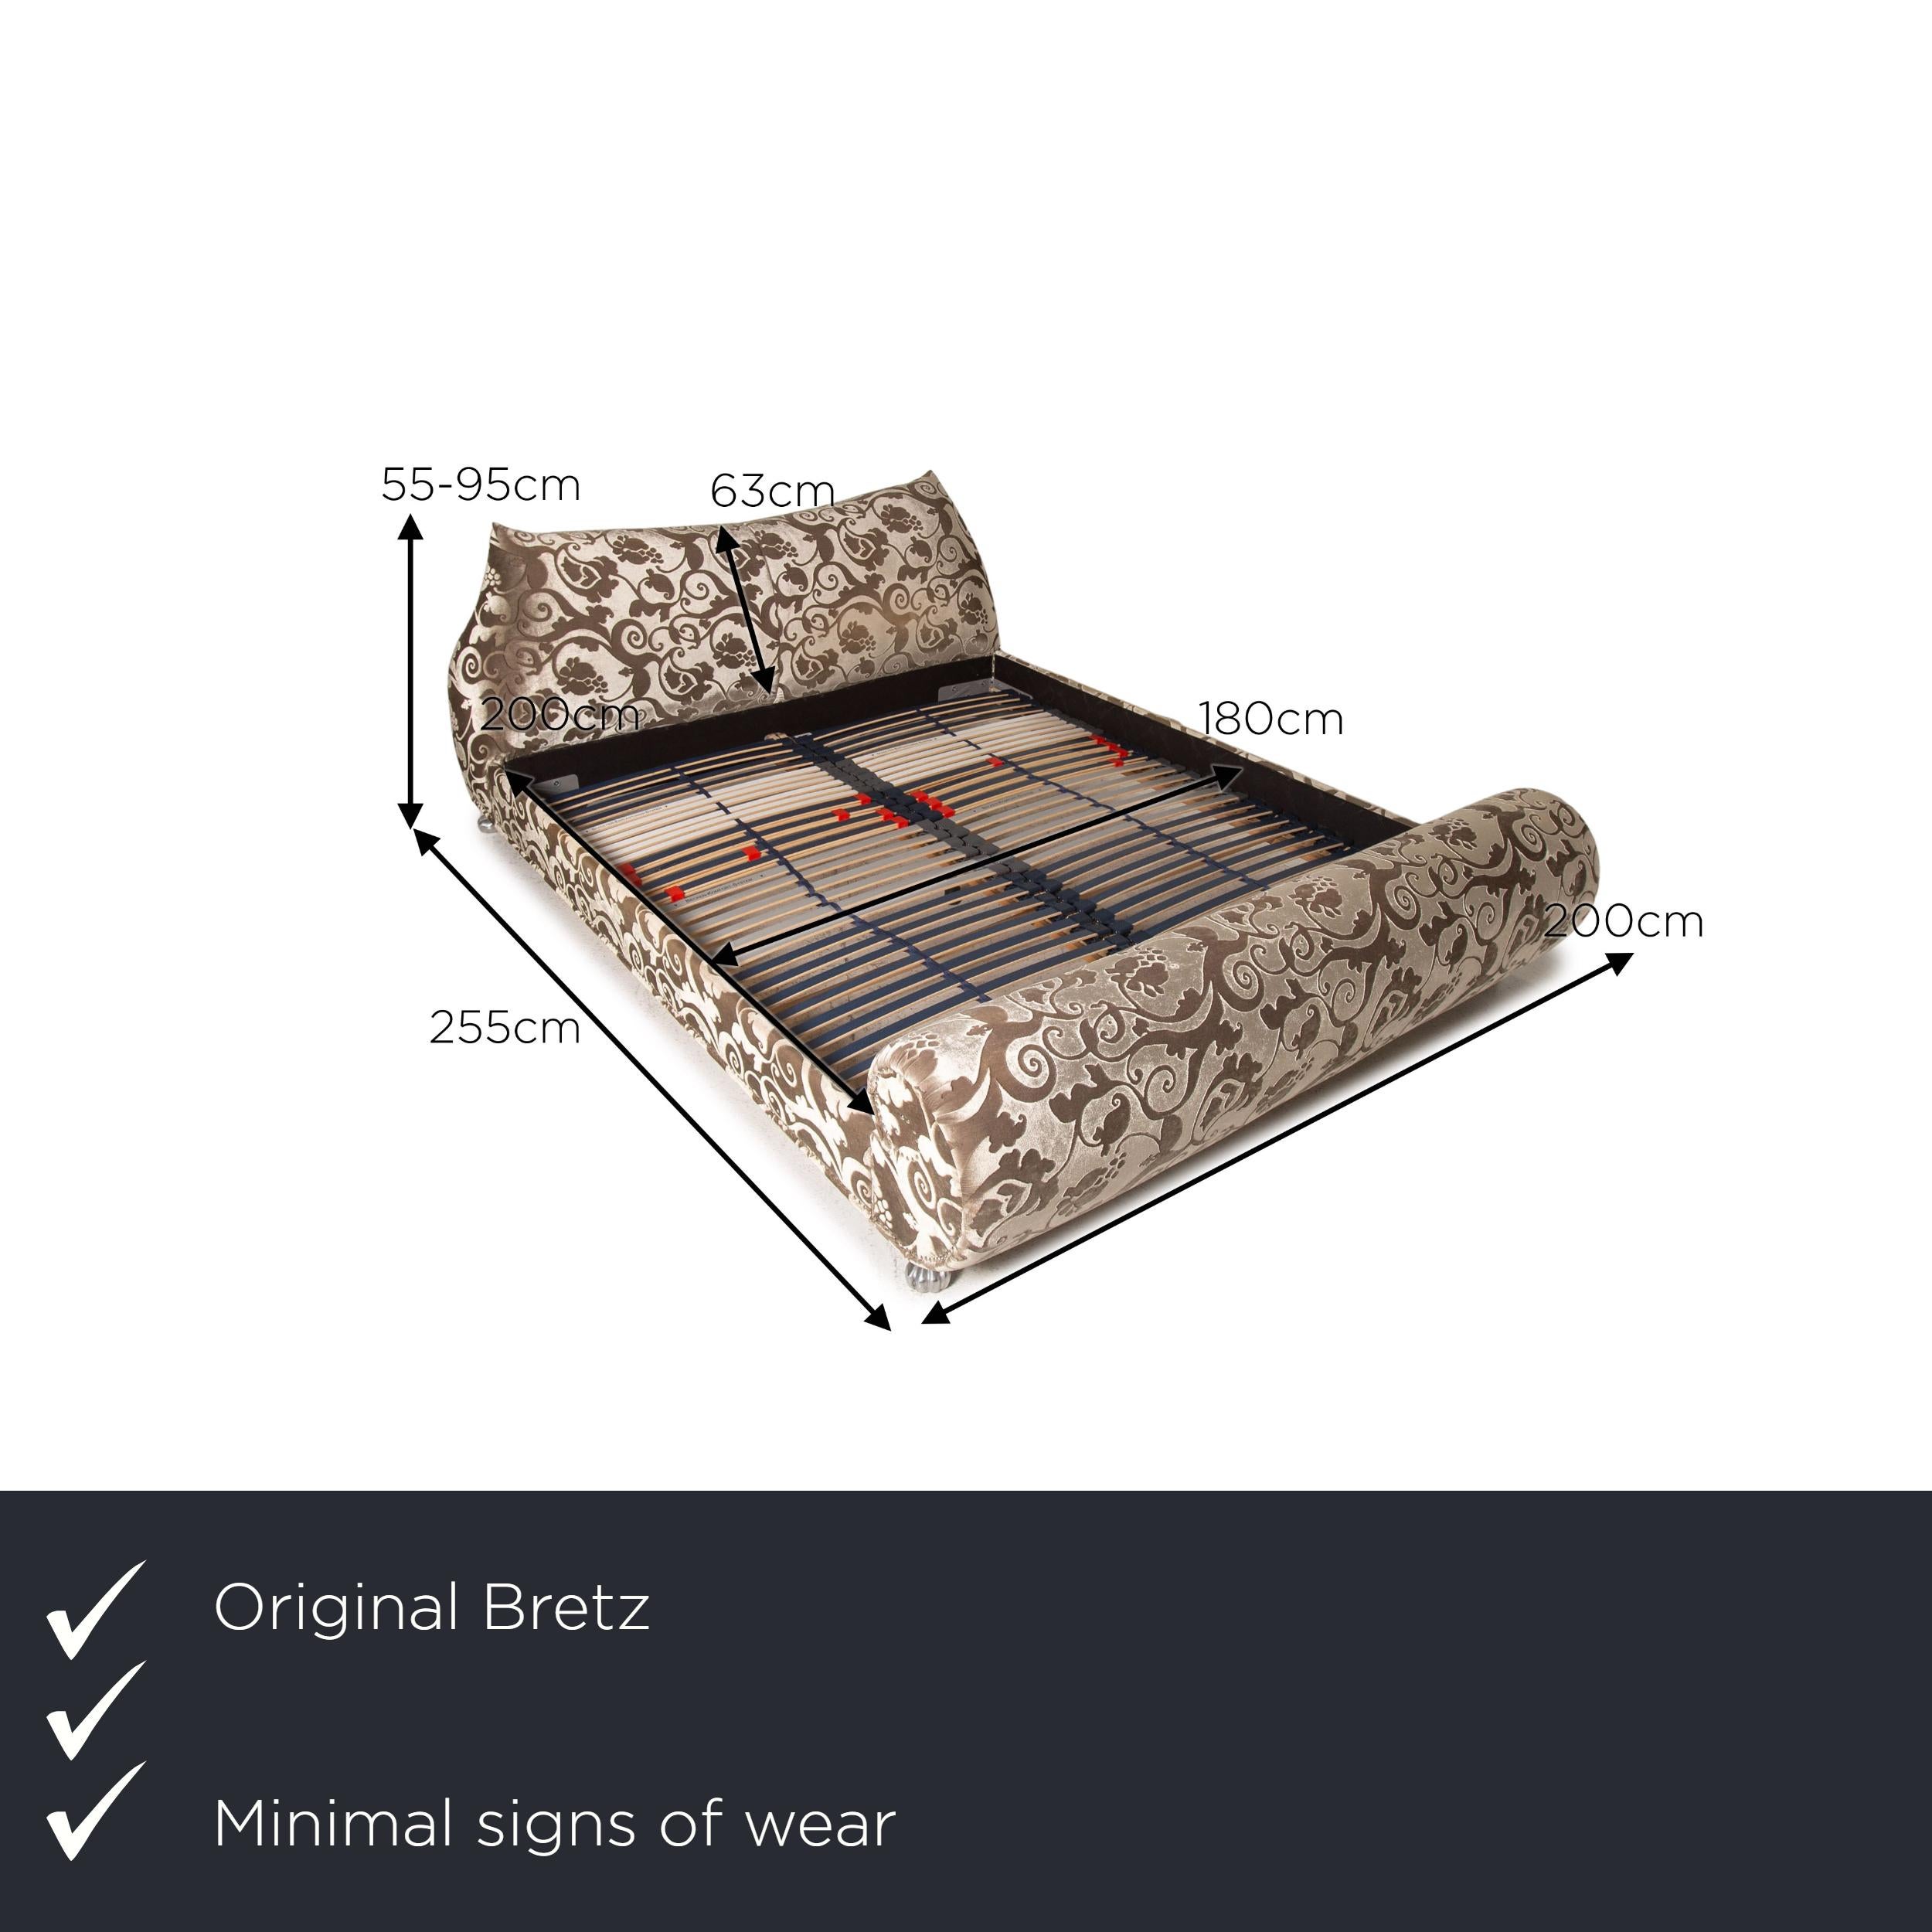 We present to you a Bretz Gaudi velvet fabric double bed cream brown 180x 200cm bed.
 

 Product measurements in centimeters:
 

Depth: 255
Width: 200
Height: 55
Seat height: 32
Seat depth: 180
Seat width: 200
Back height: 63.

 